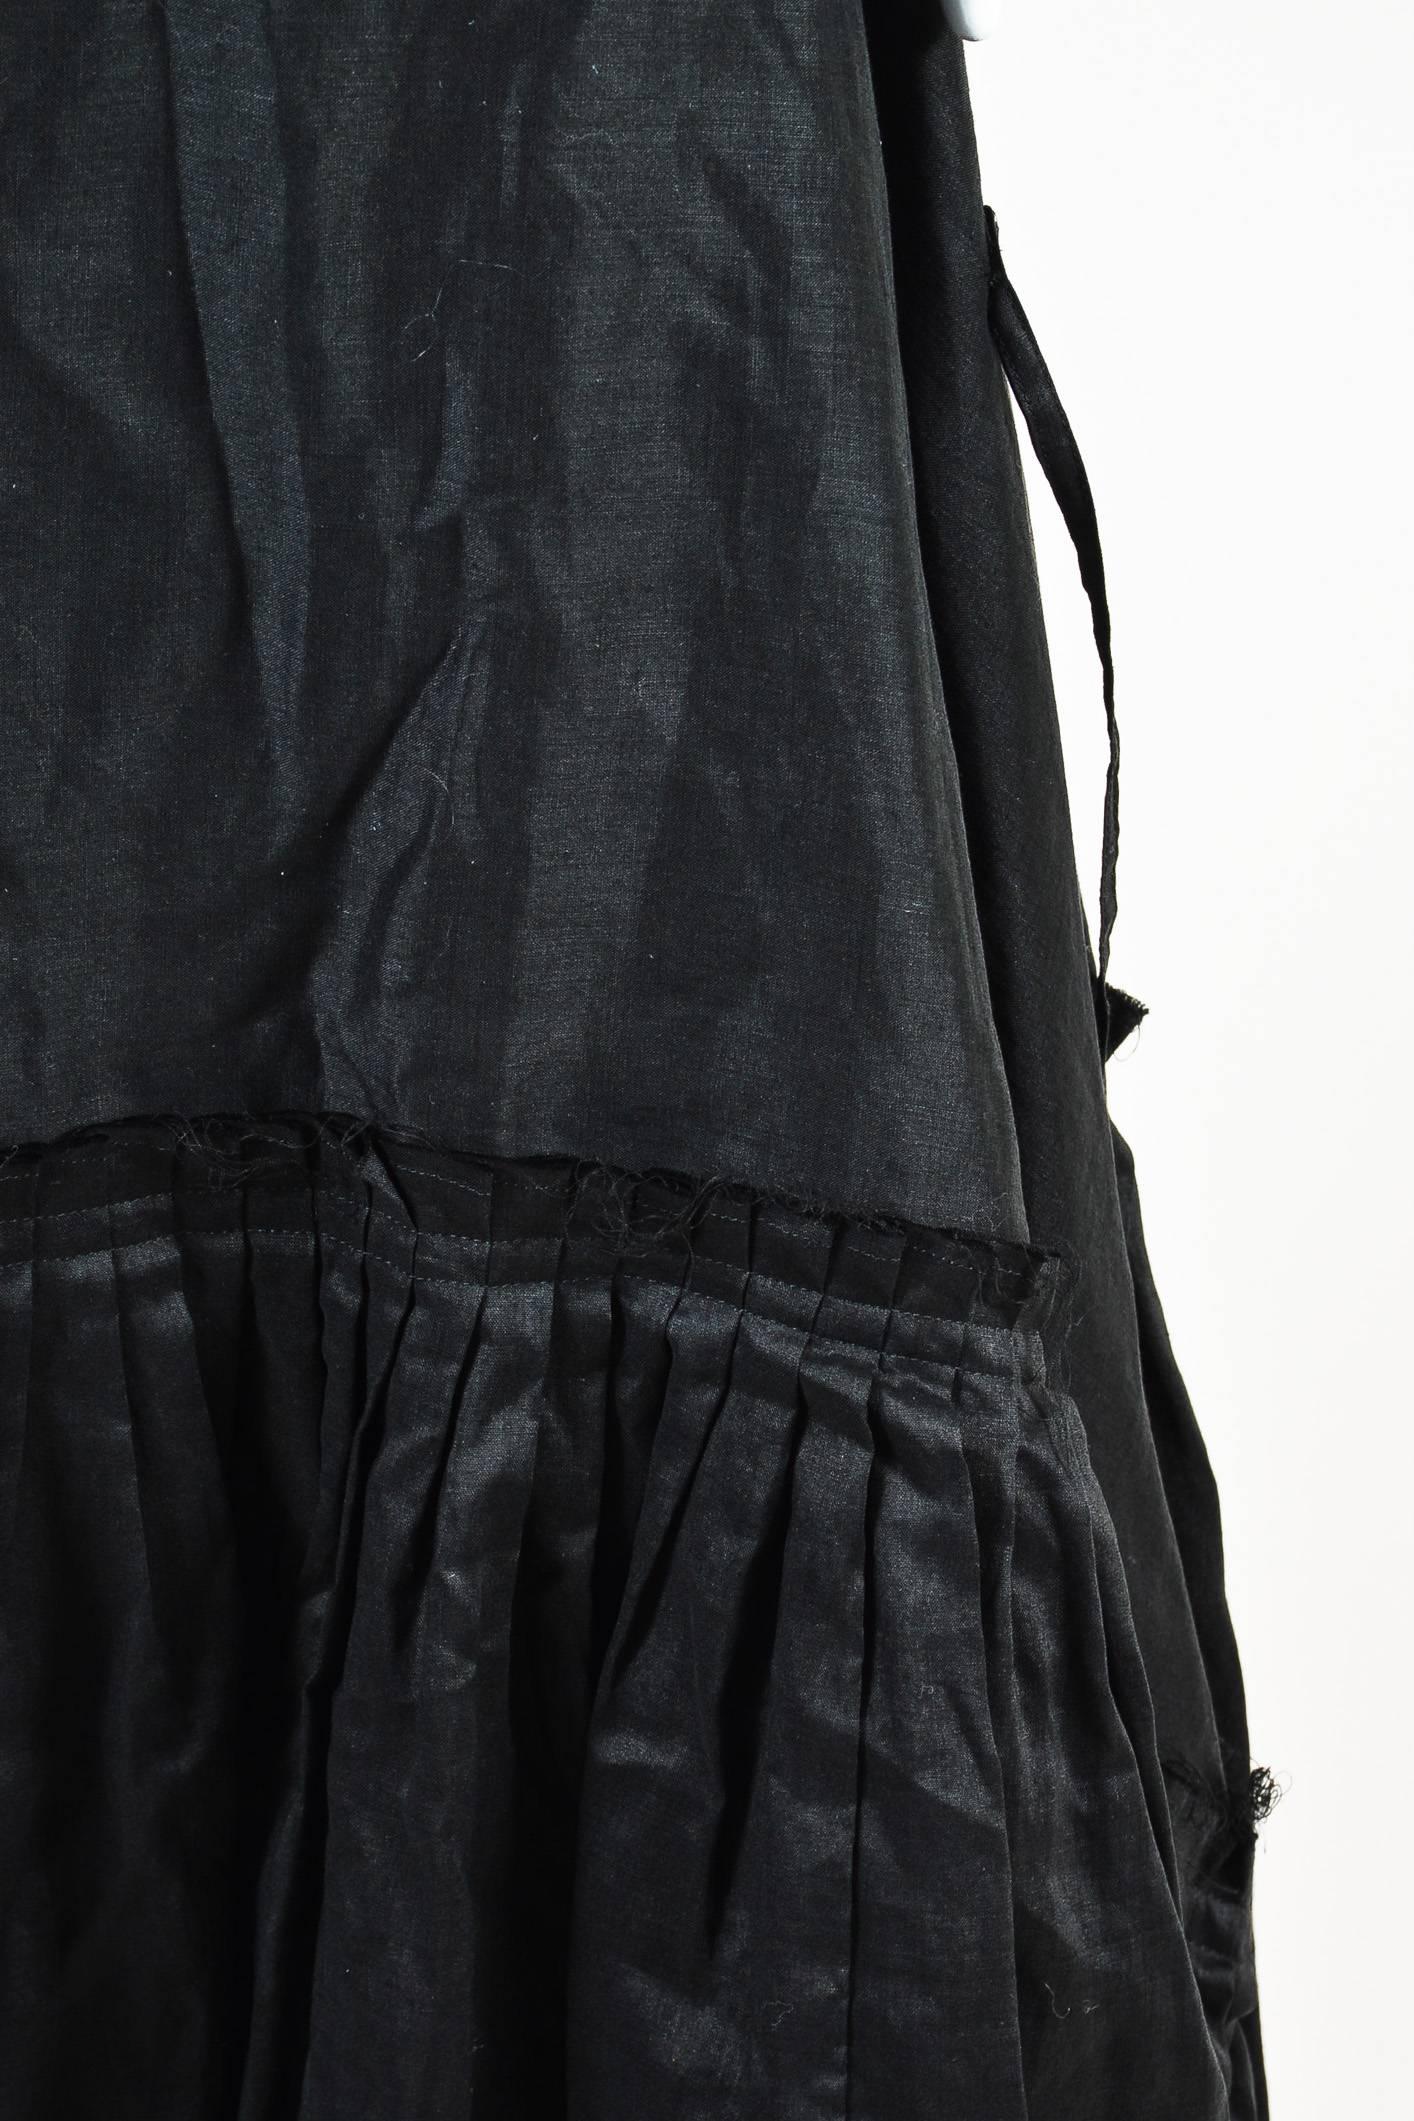 Women's Junya Watanabe Comme des Garcons New w/Tag Black Linen Tiered Pleated Skirt SZ M For Sale